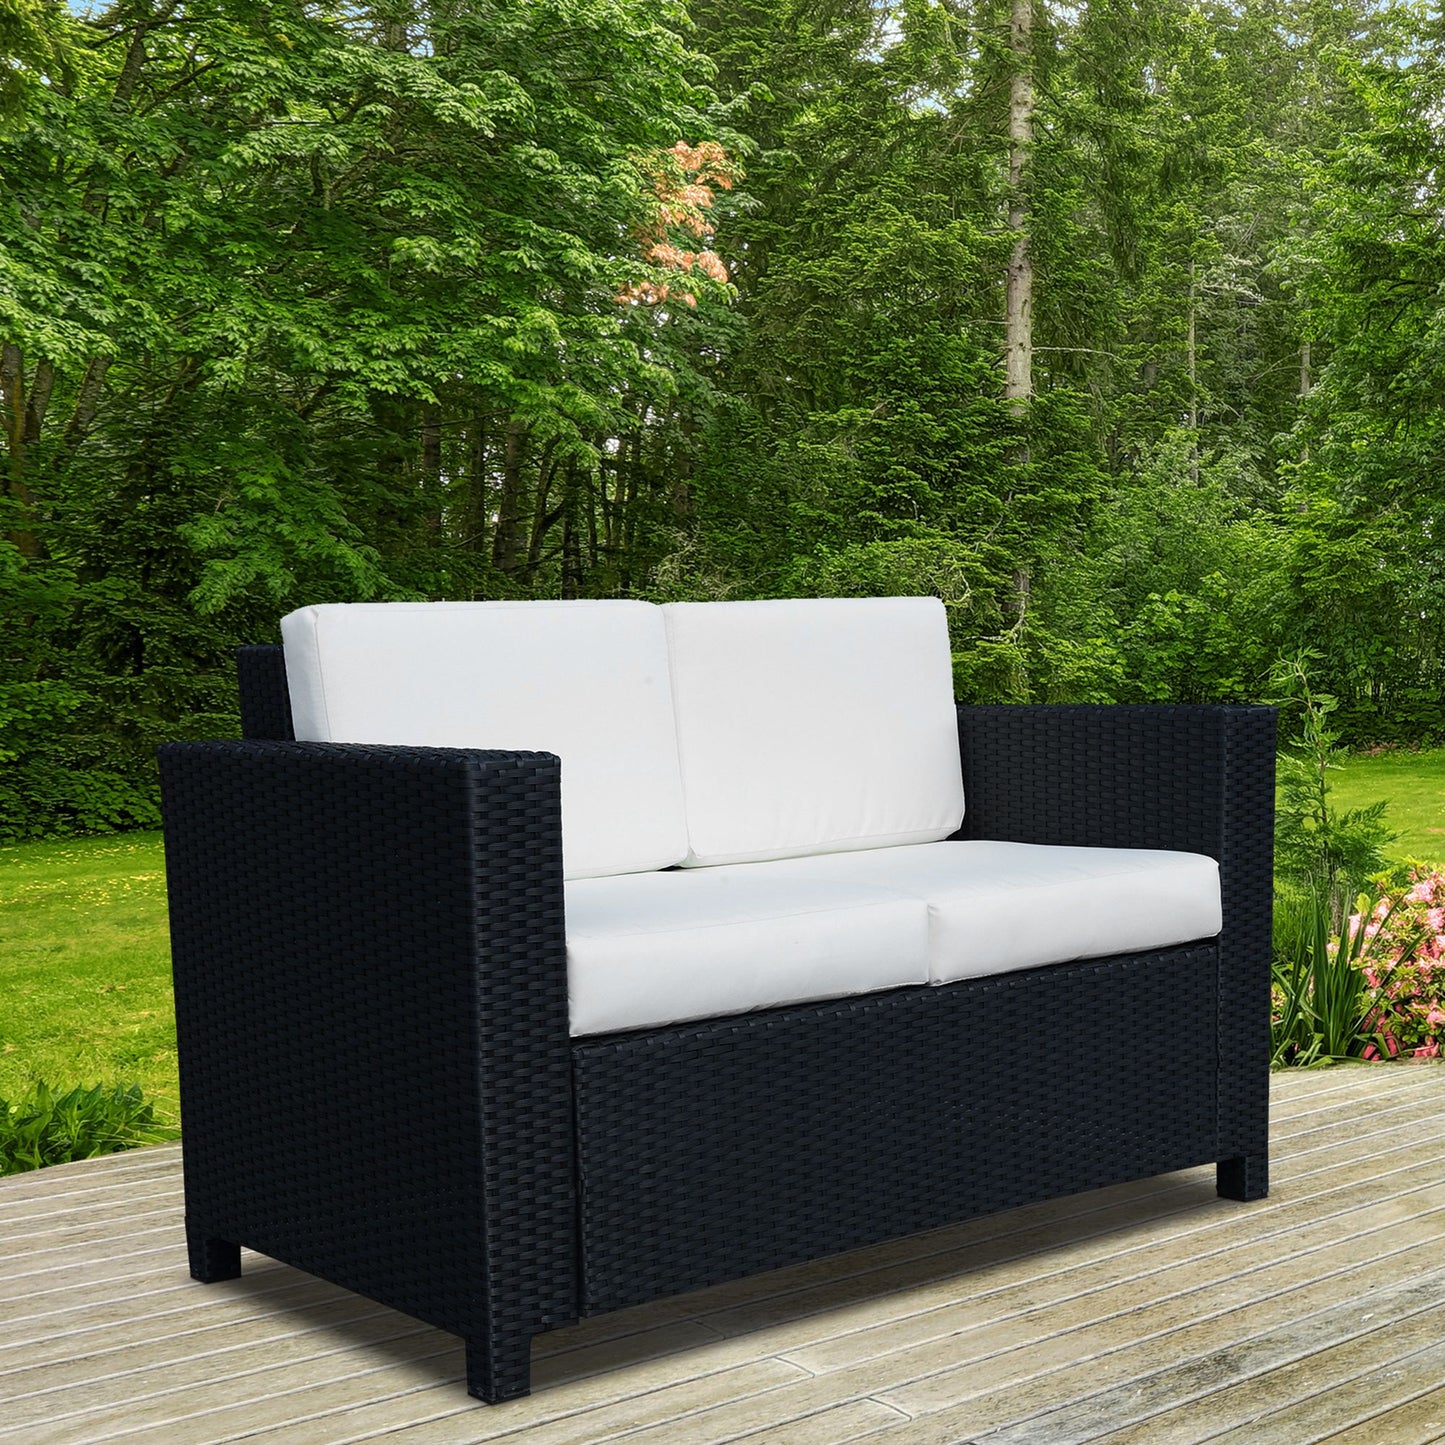 Outsunny 2 Seater Rattan Garden Sofa Black Double Couch Loveseat Wicker